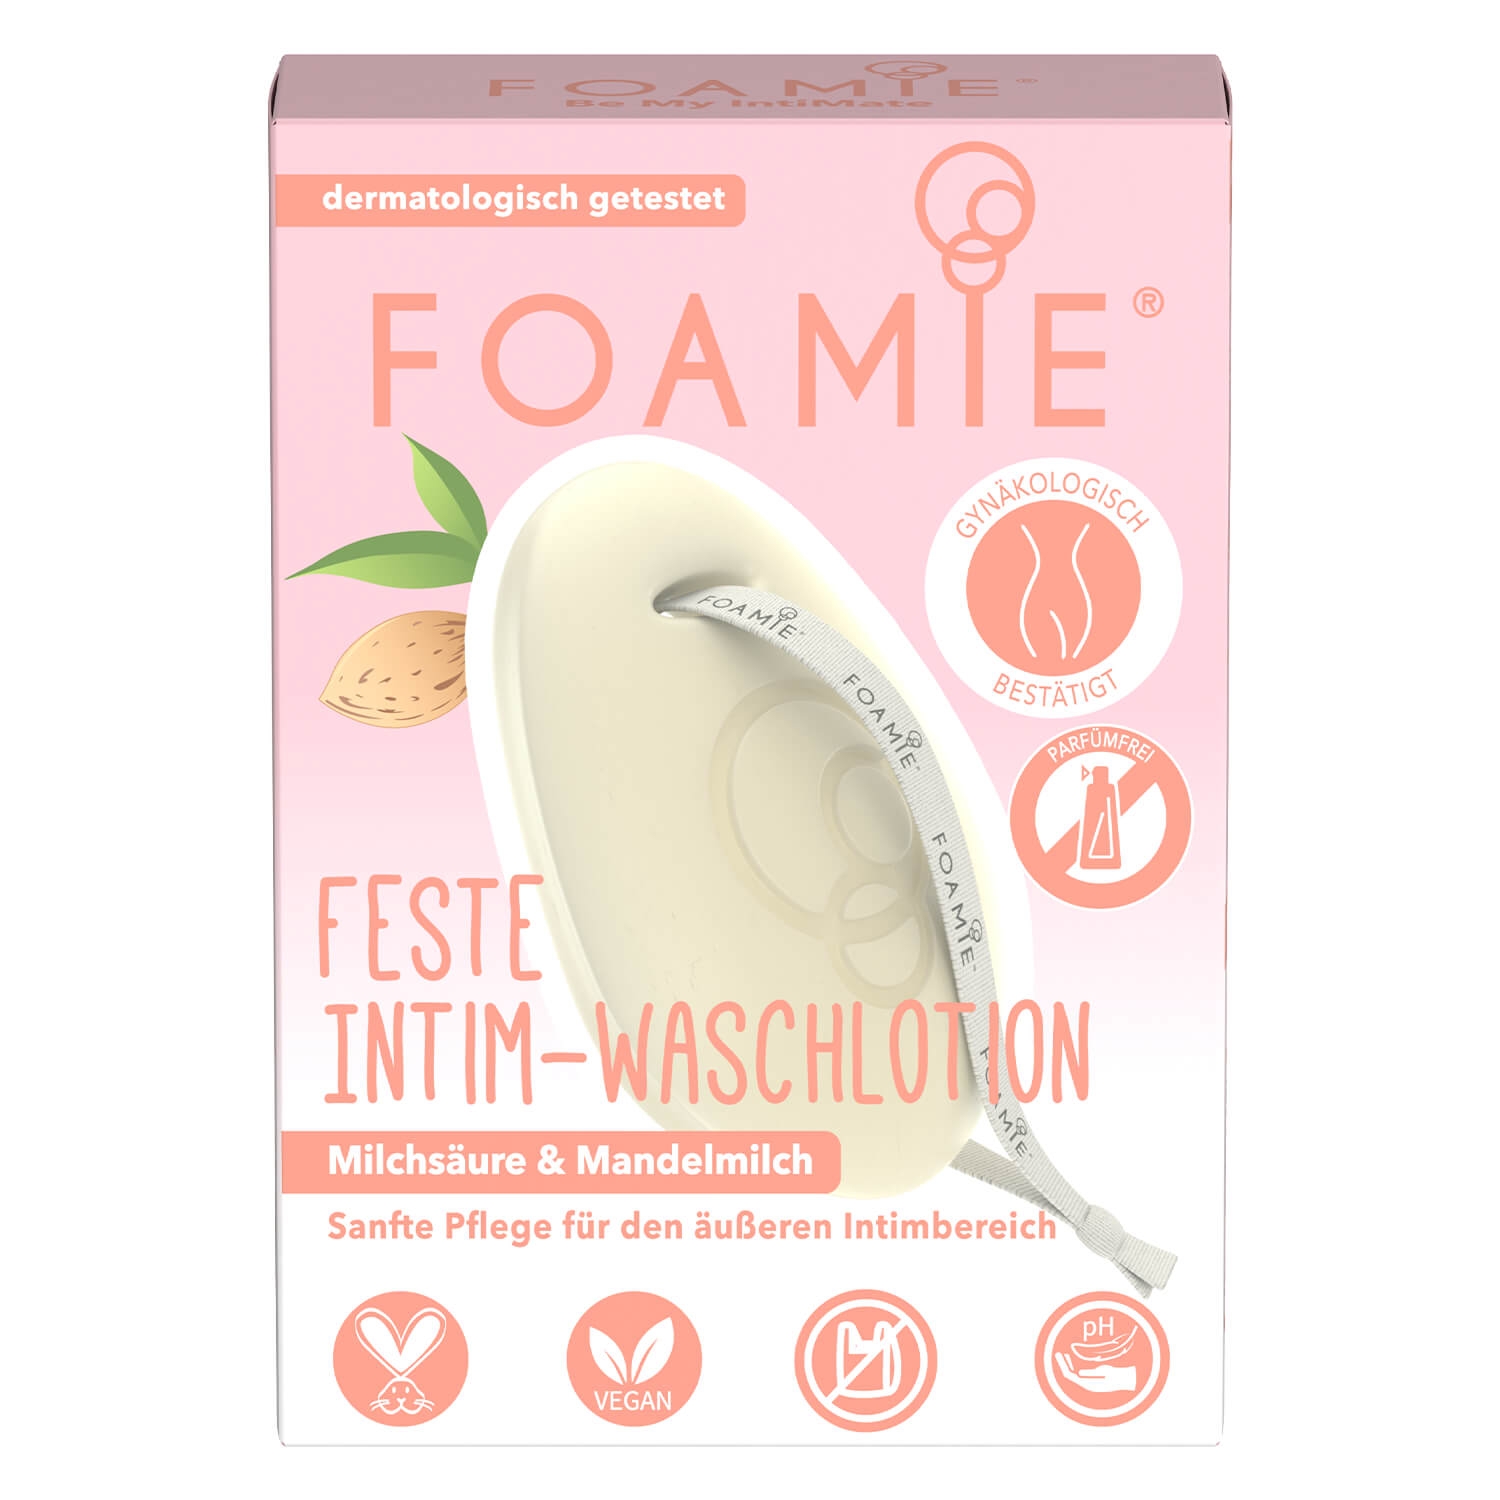 Product image from Foamie - Feste Intim-Waschlotion